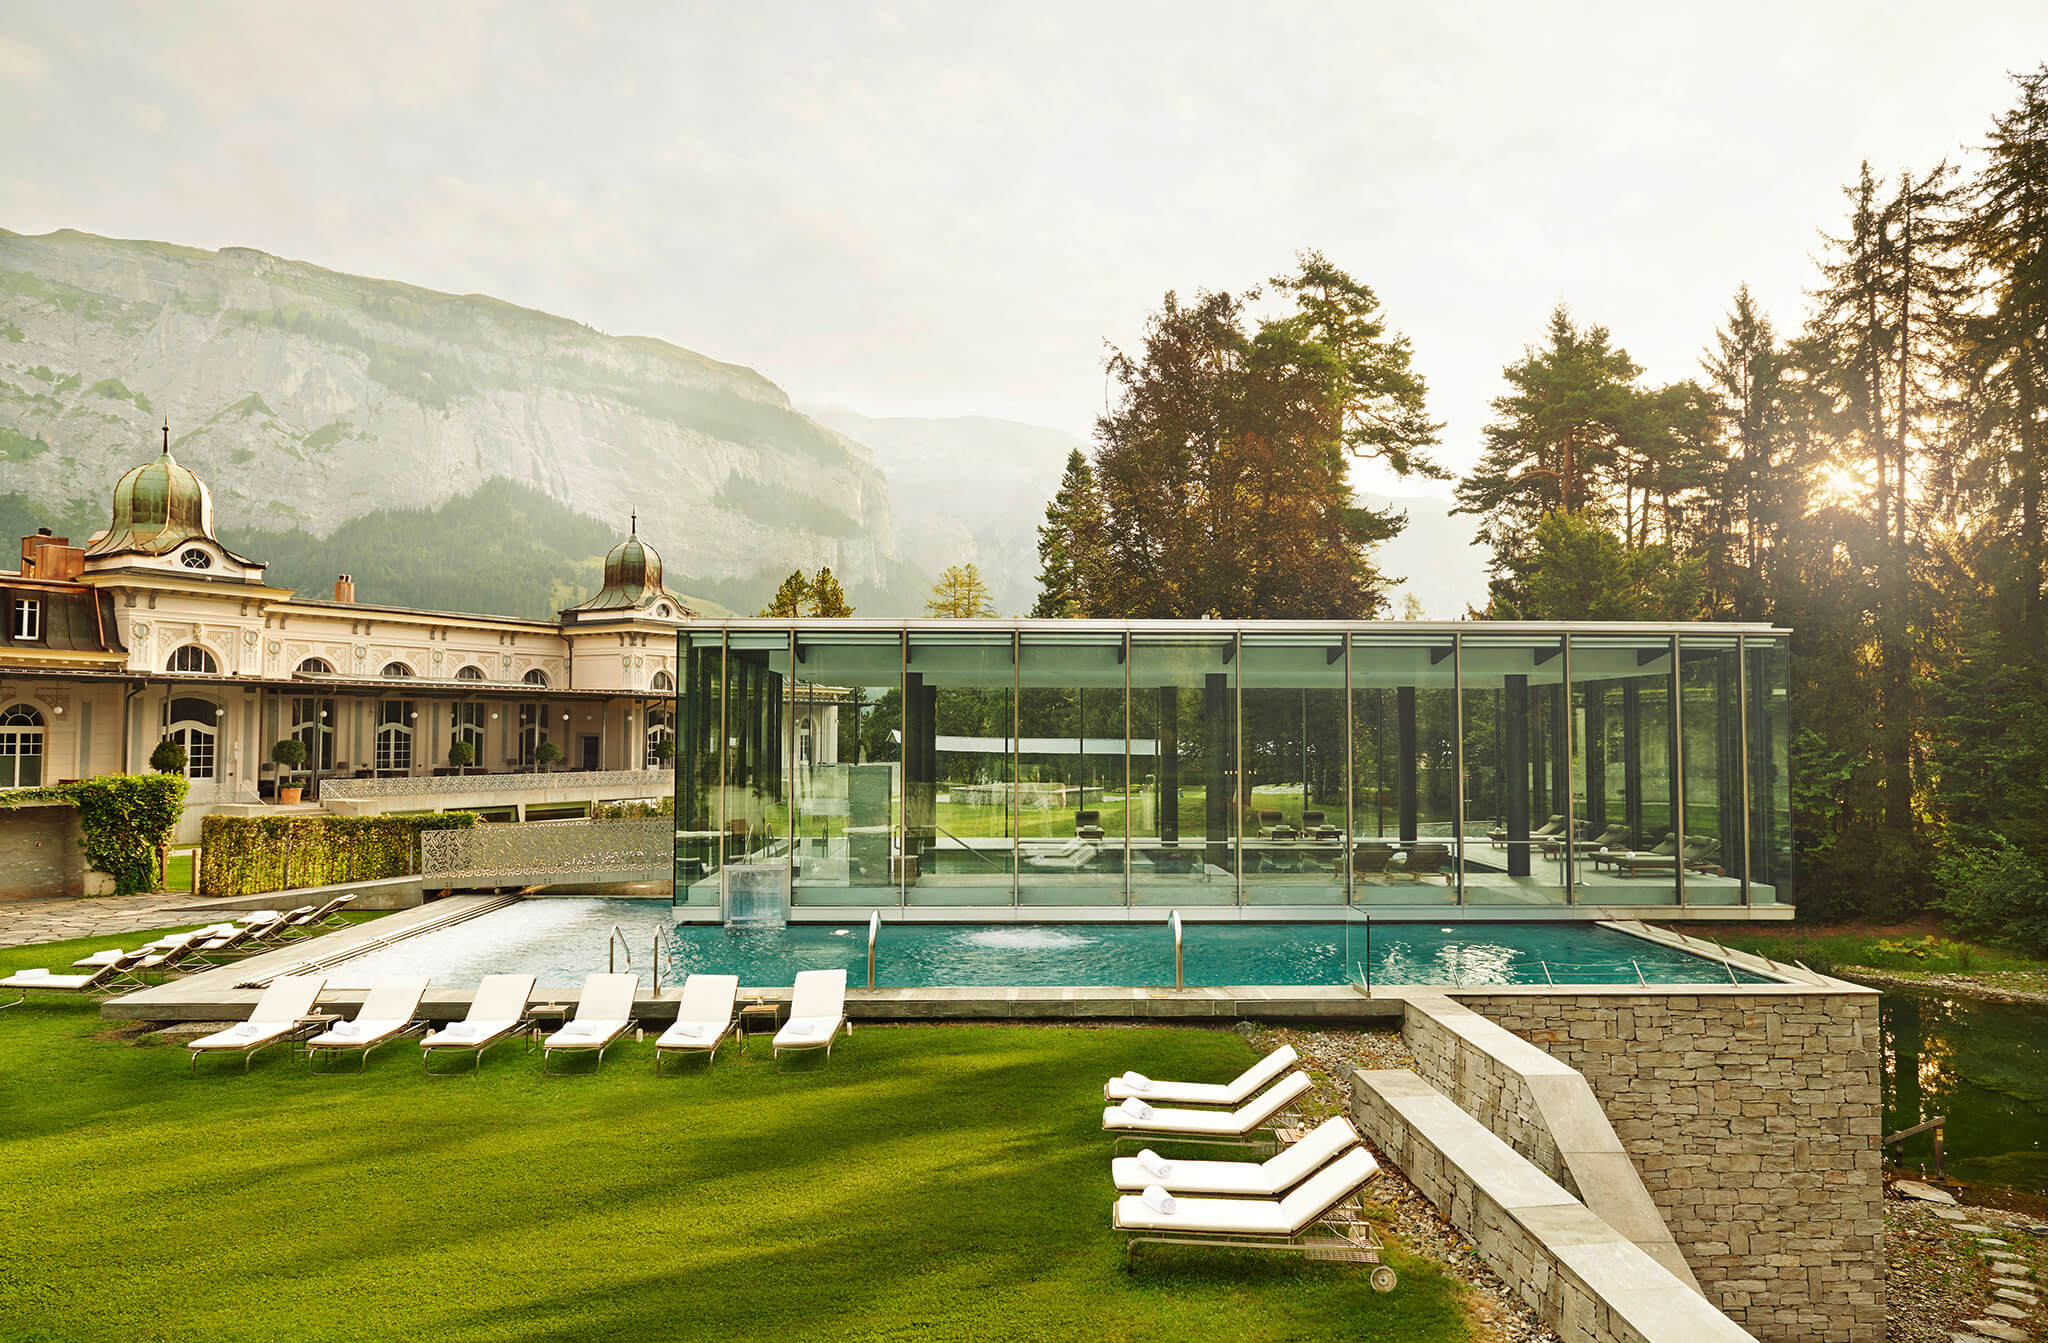 Waldhaus Flims: Redefining hospitality in the Swiss Alps